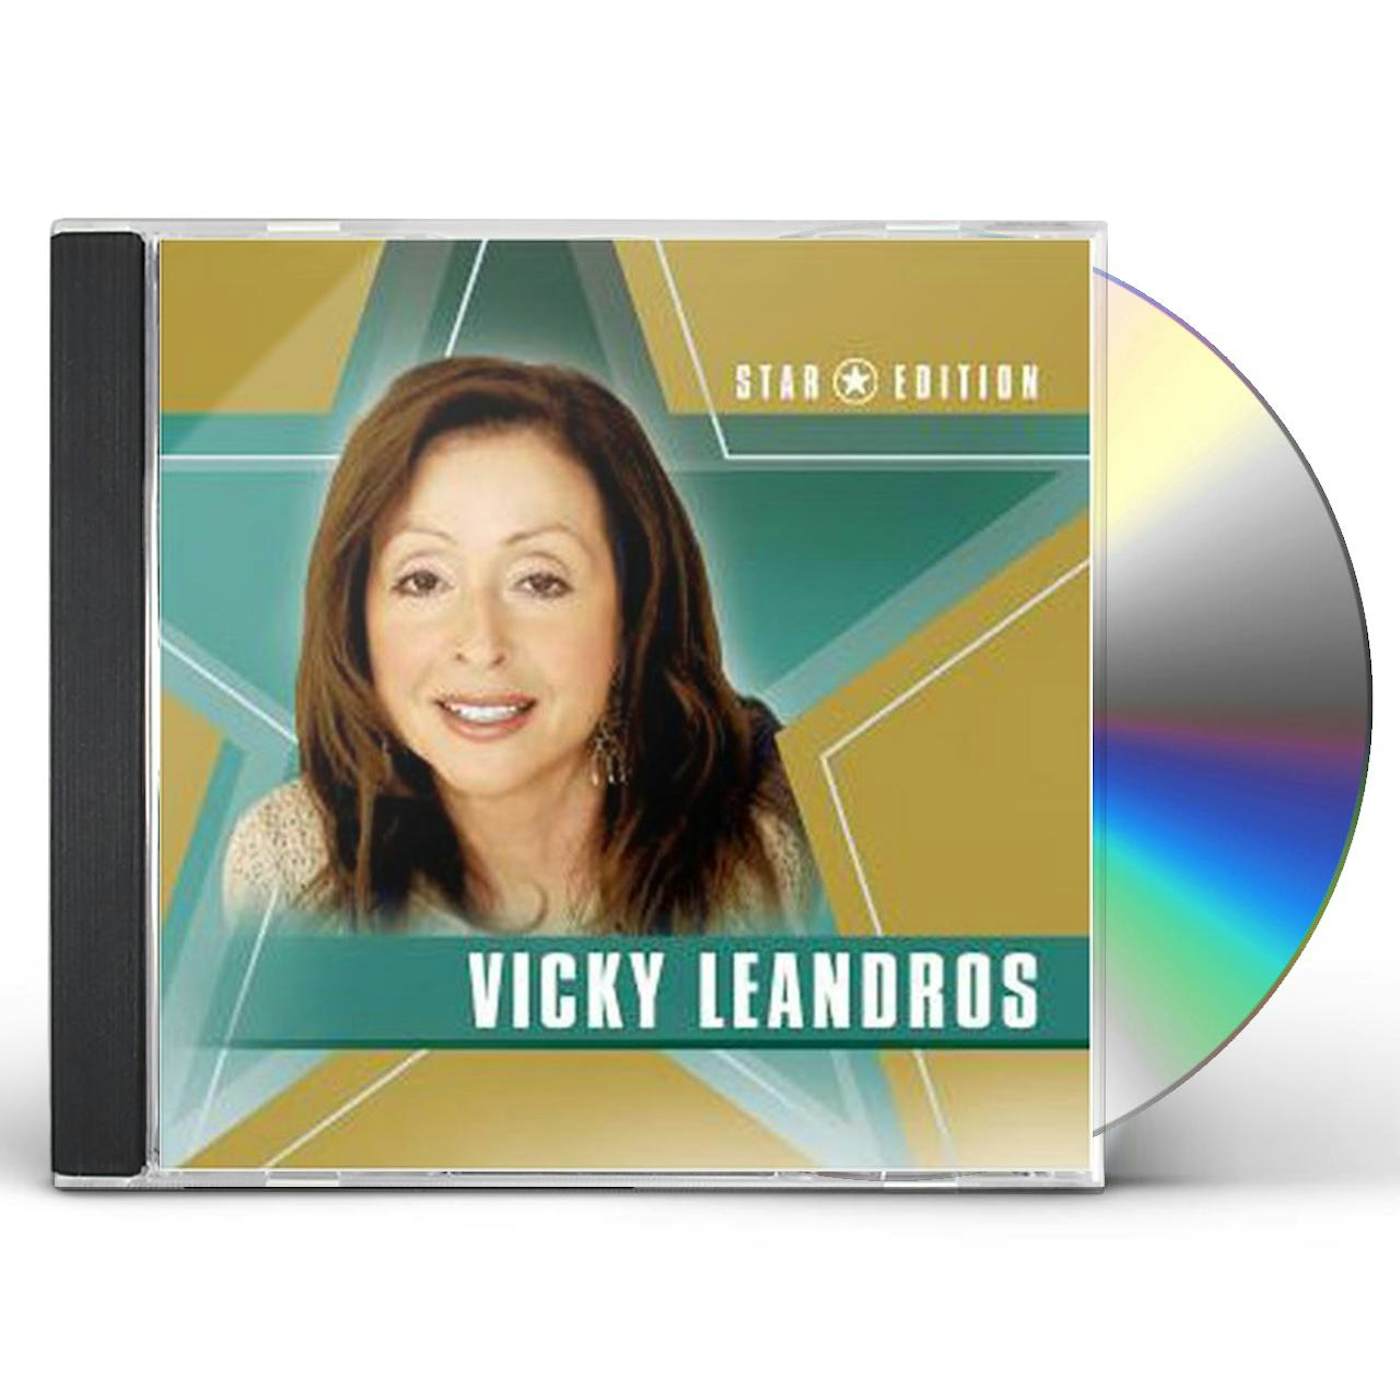 Vicky Leandros STAR EDITION CD